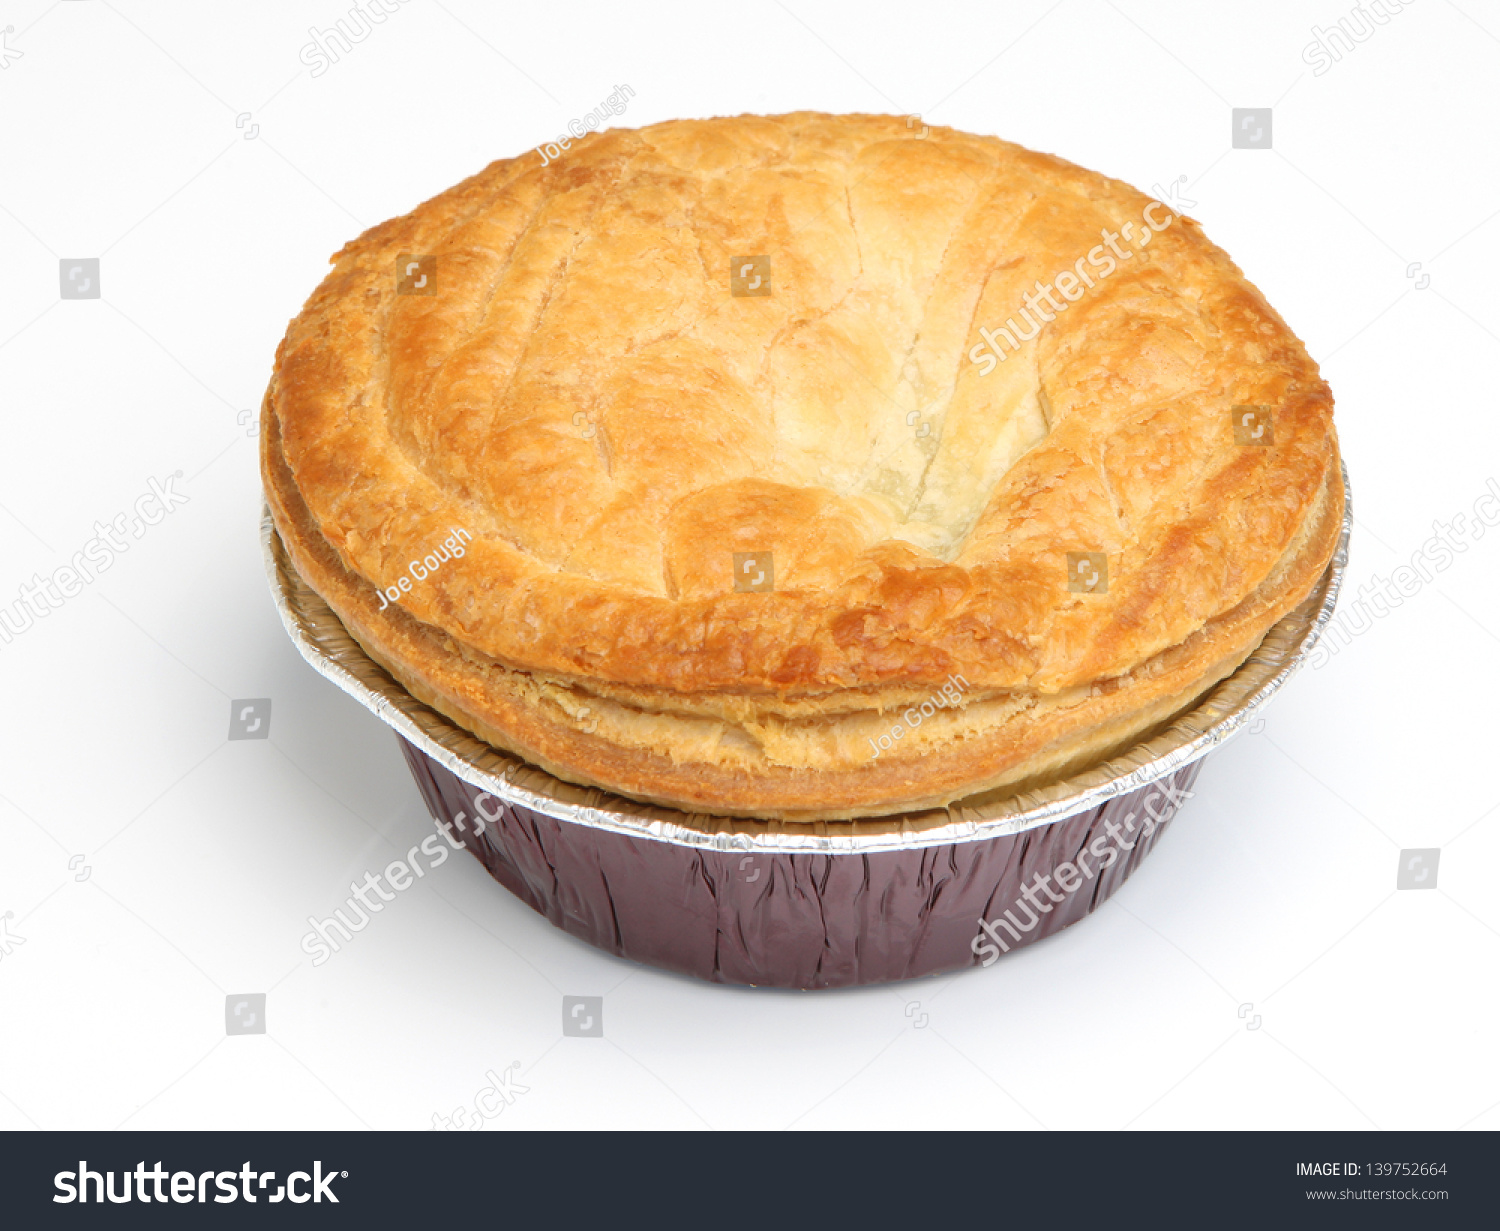 free clipart meat pie - photo #30